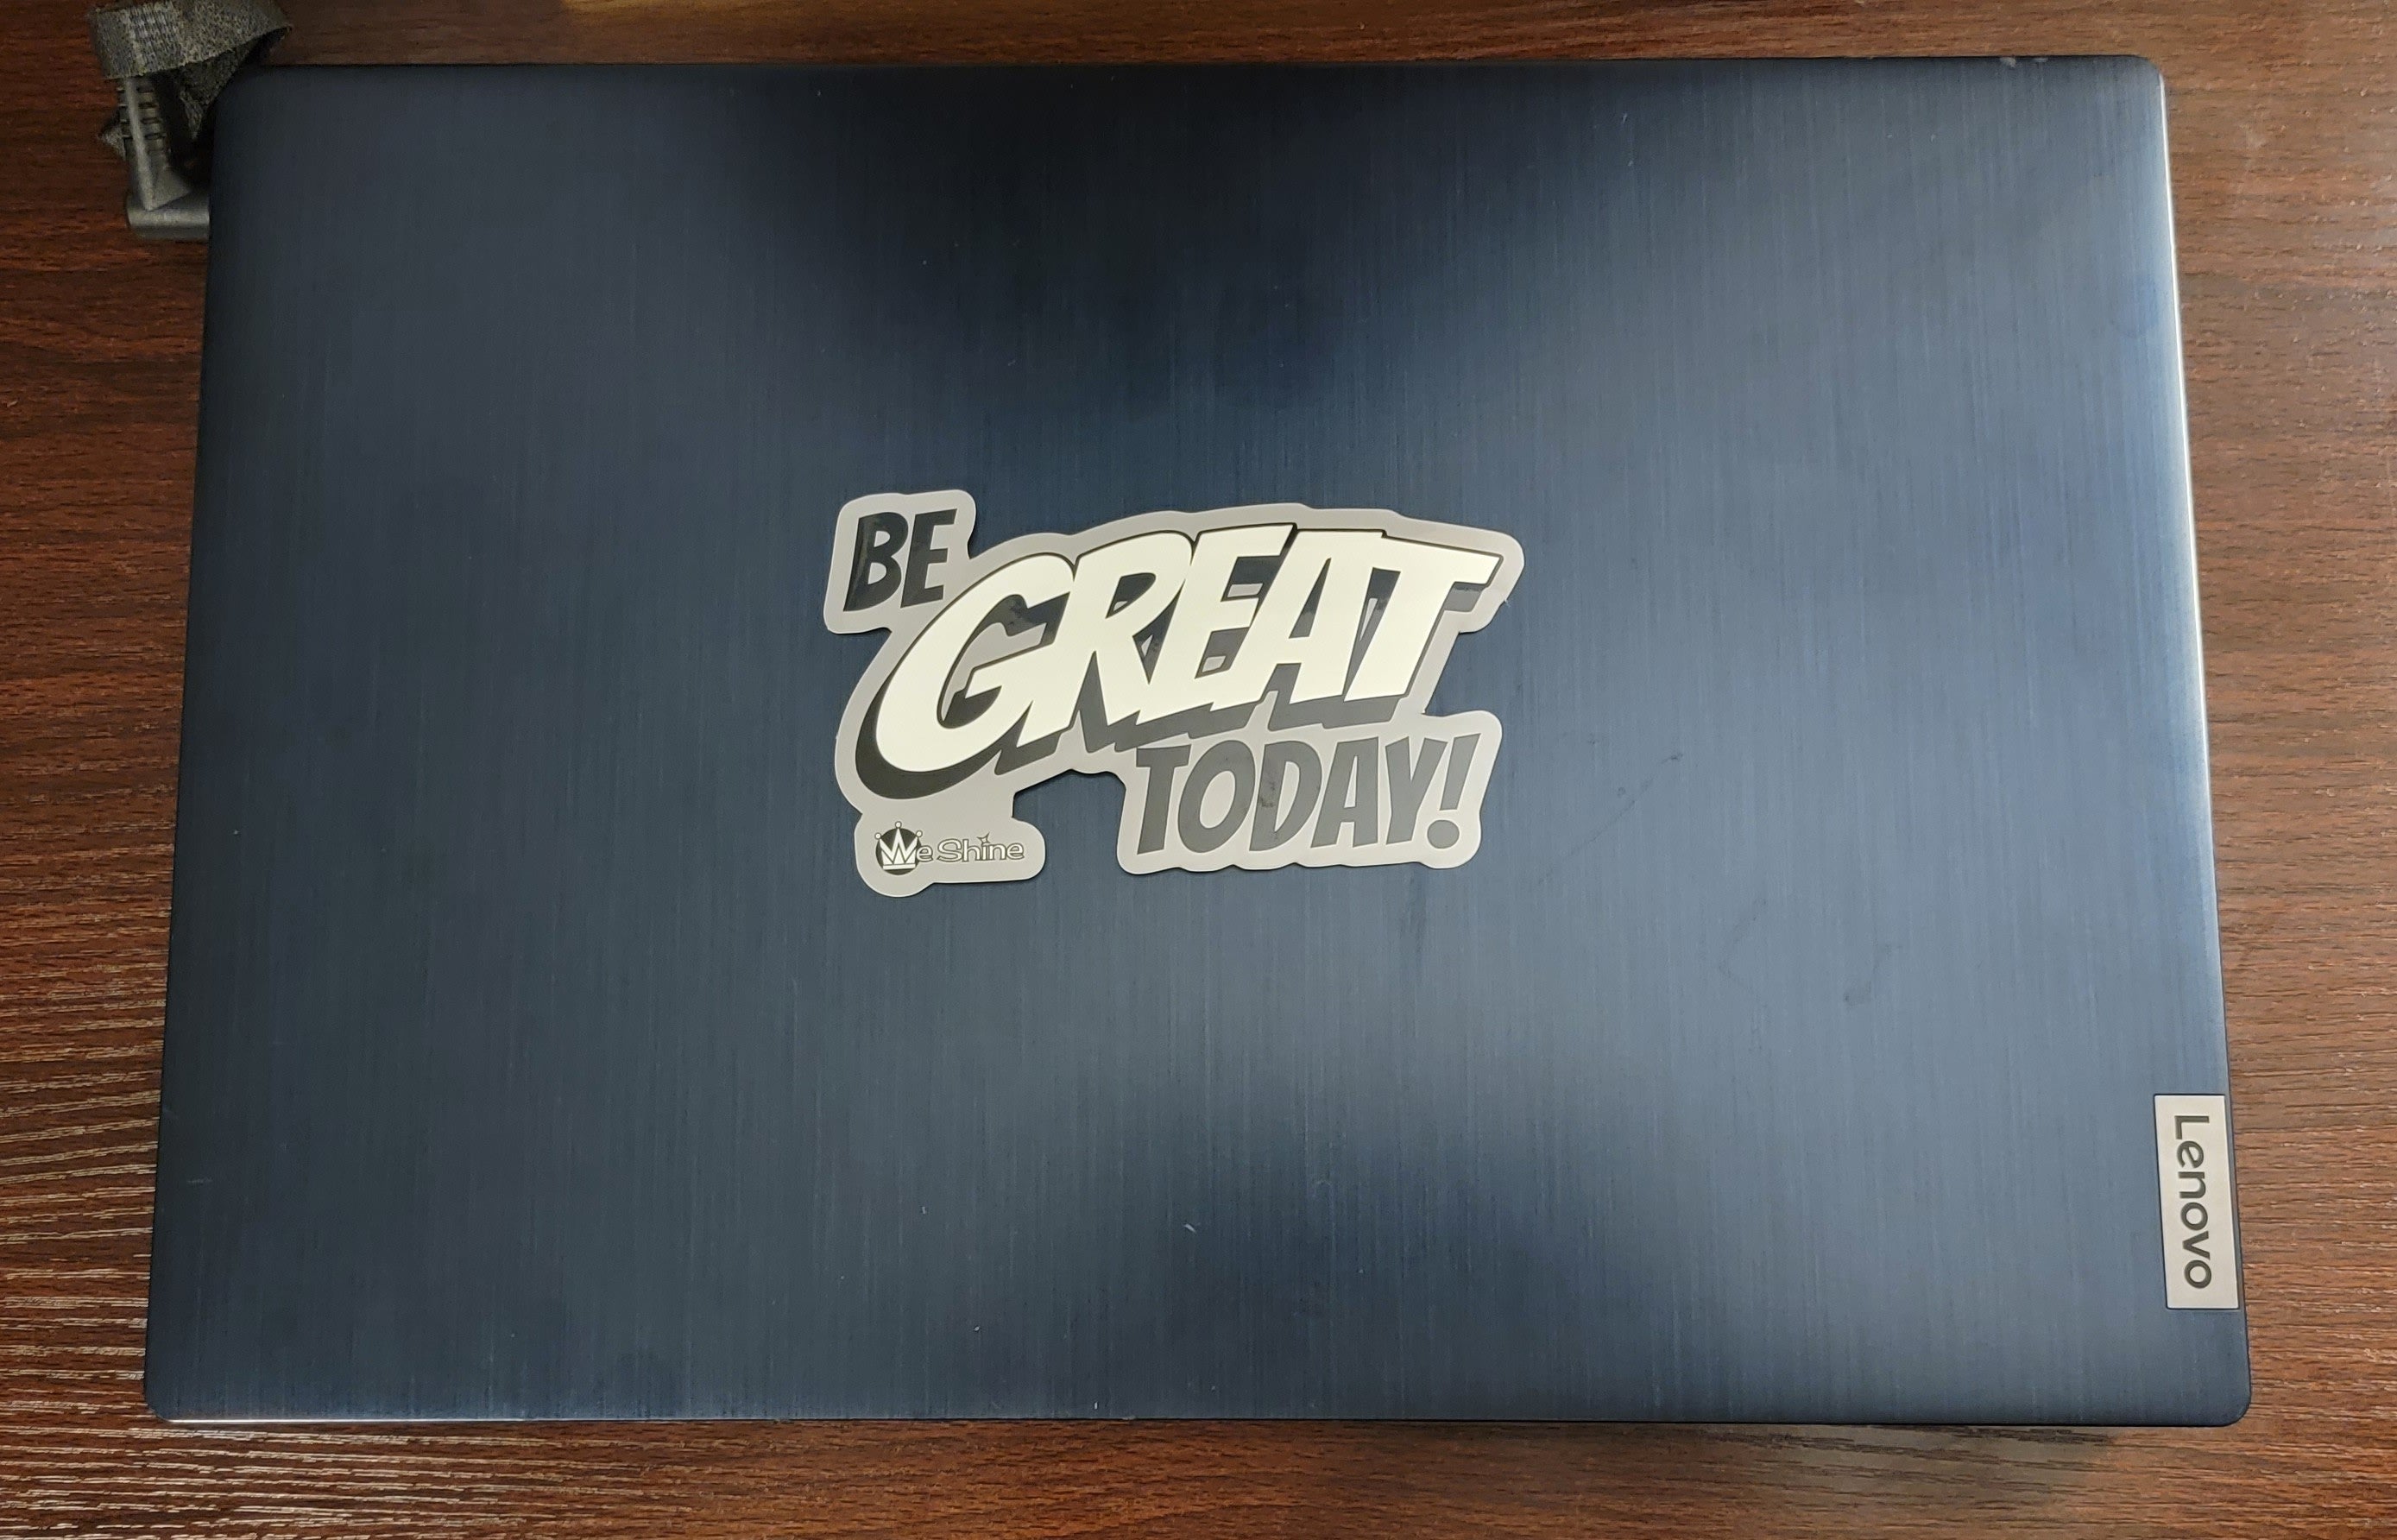 Be Great Today - Vinyl Decal